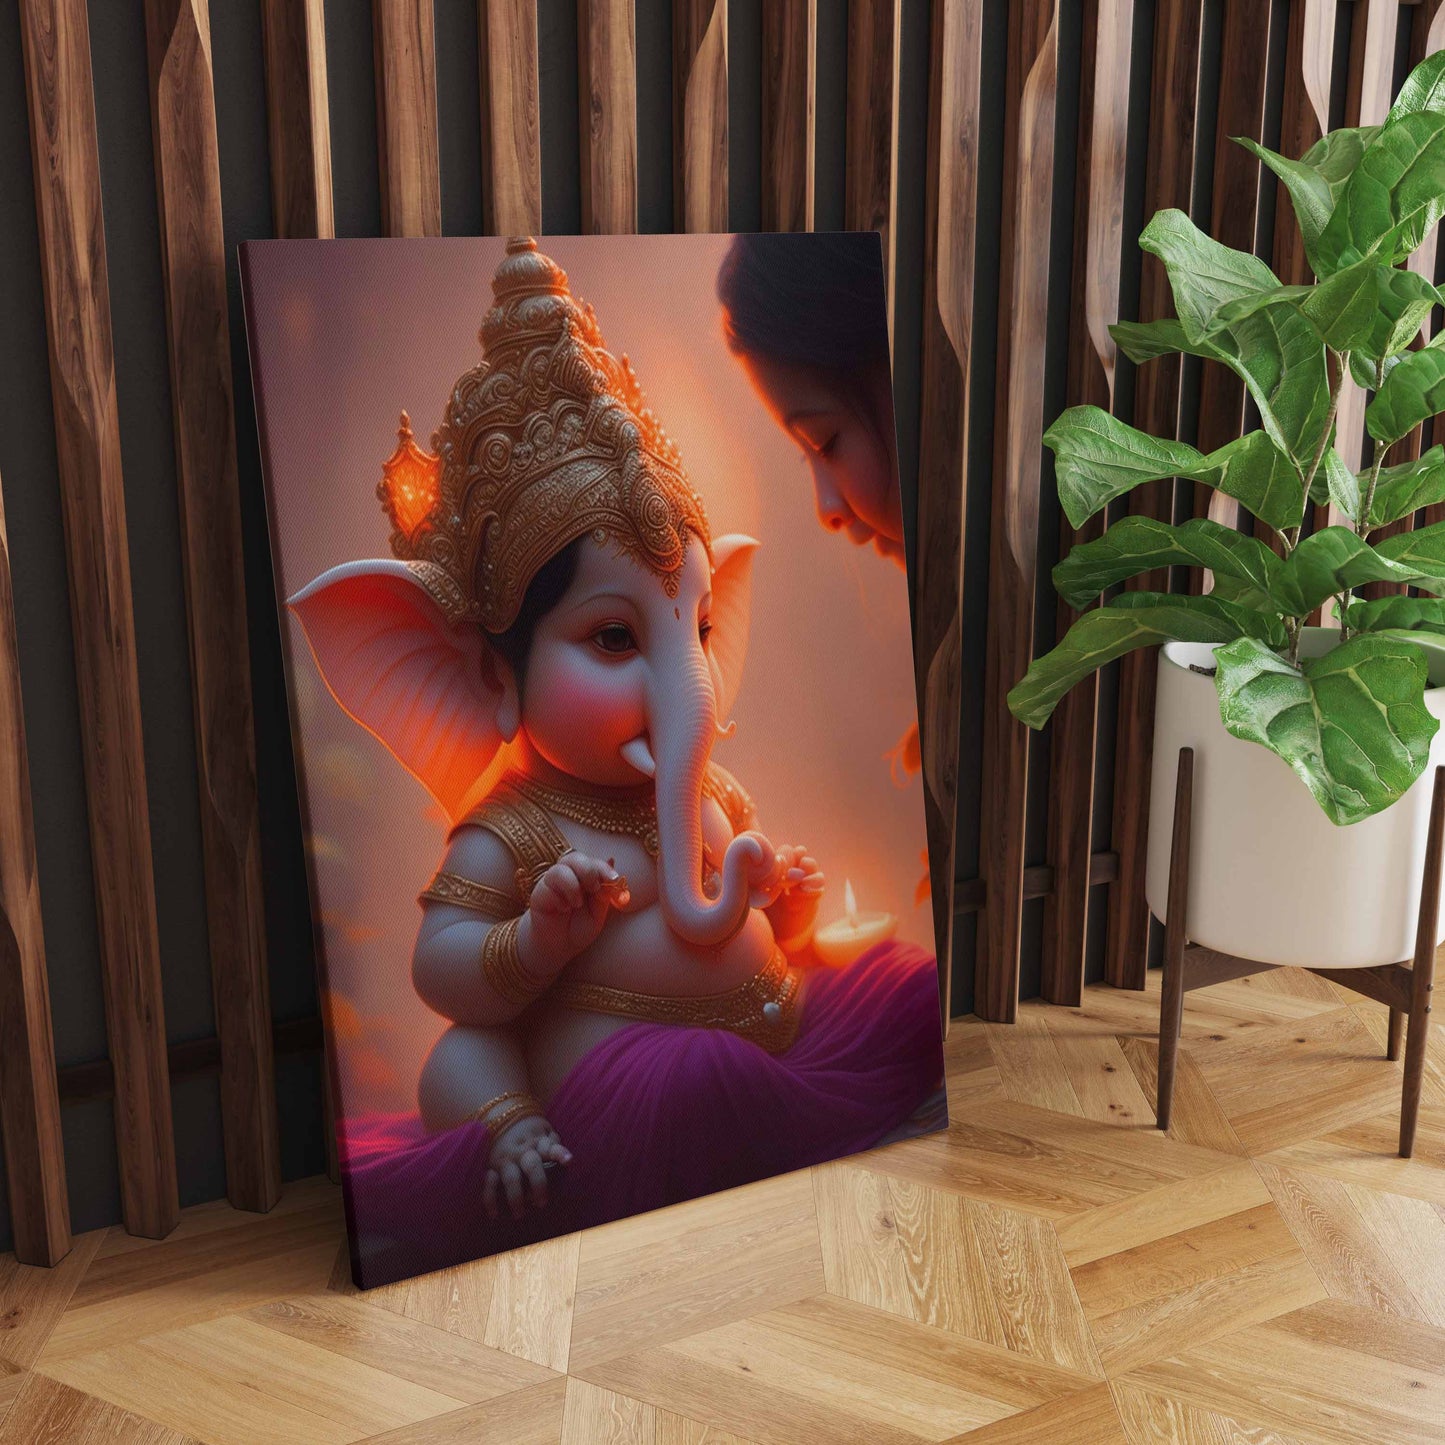 Sacred Offering: A Wall Art Depicting Almsgiving to Lord Ganesh - Embrace the Spirit of Devotion and Generosity - S05E56